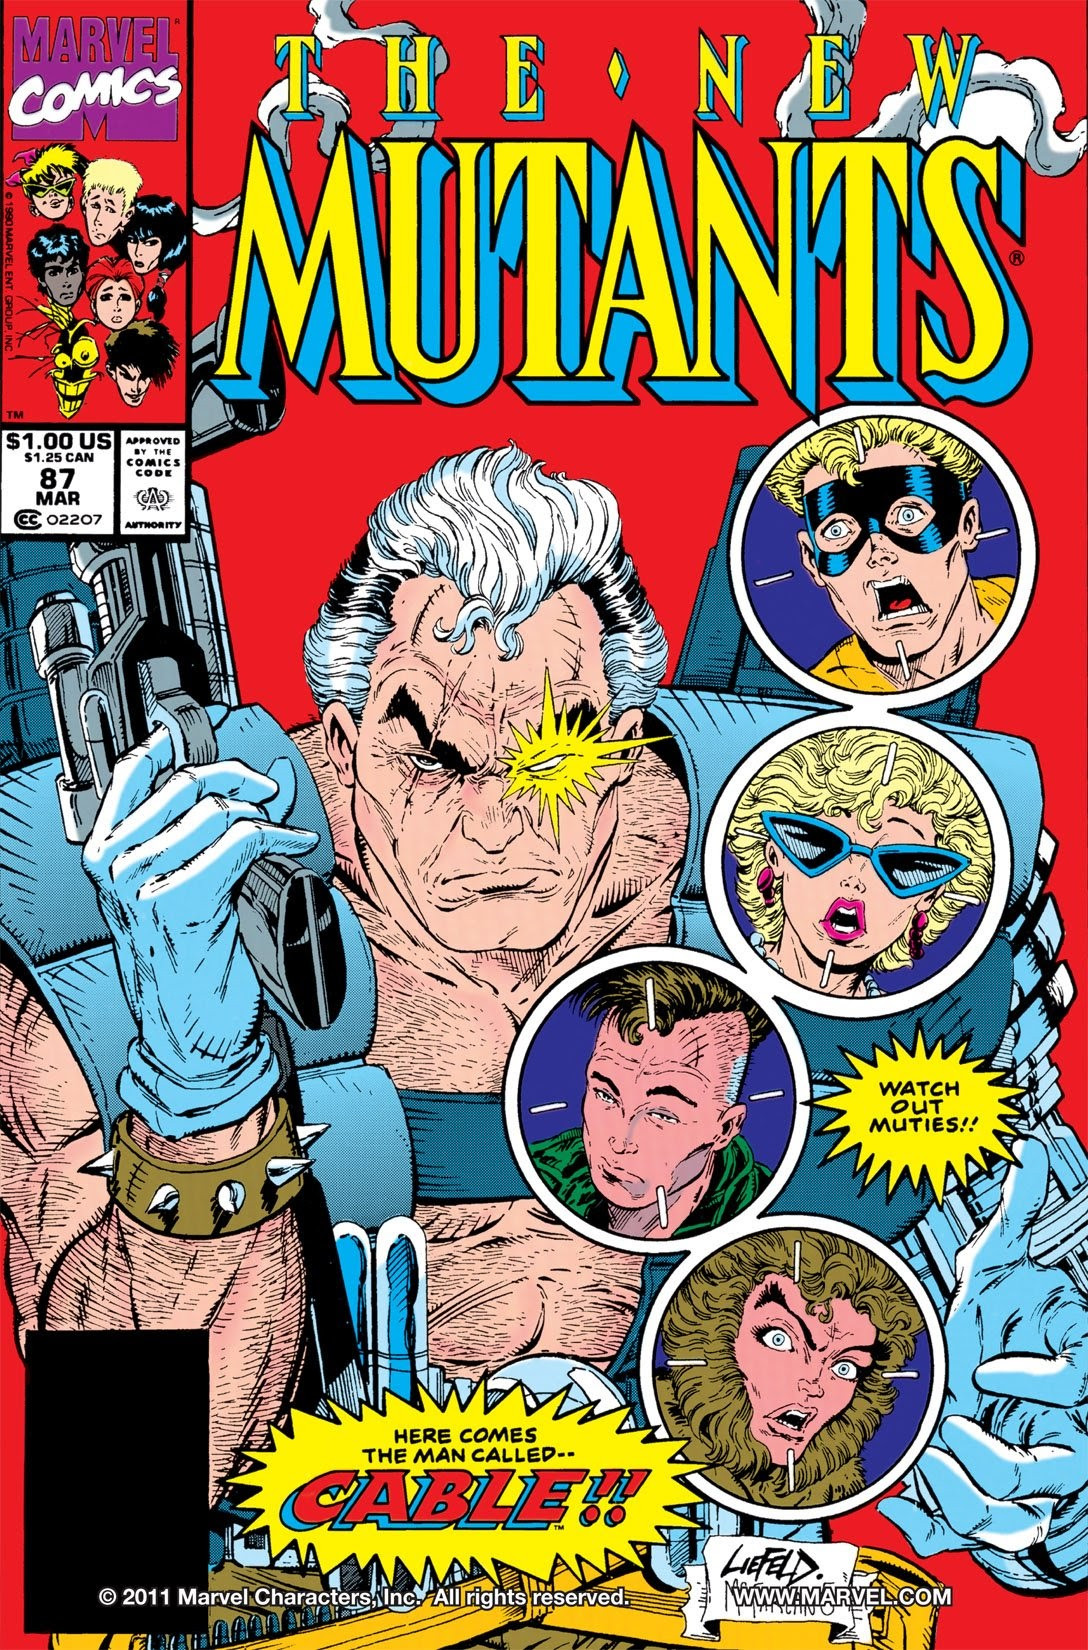 New Mutants: Which Character Are You?